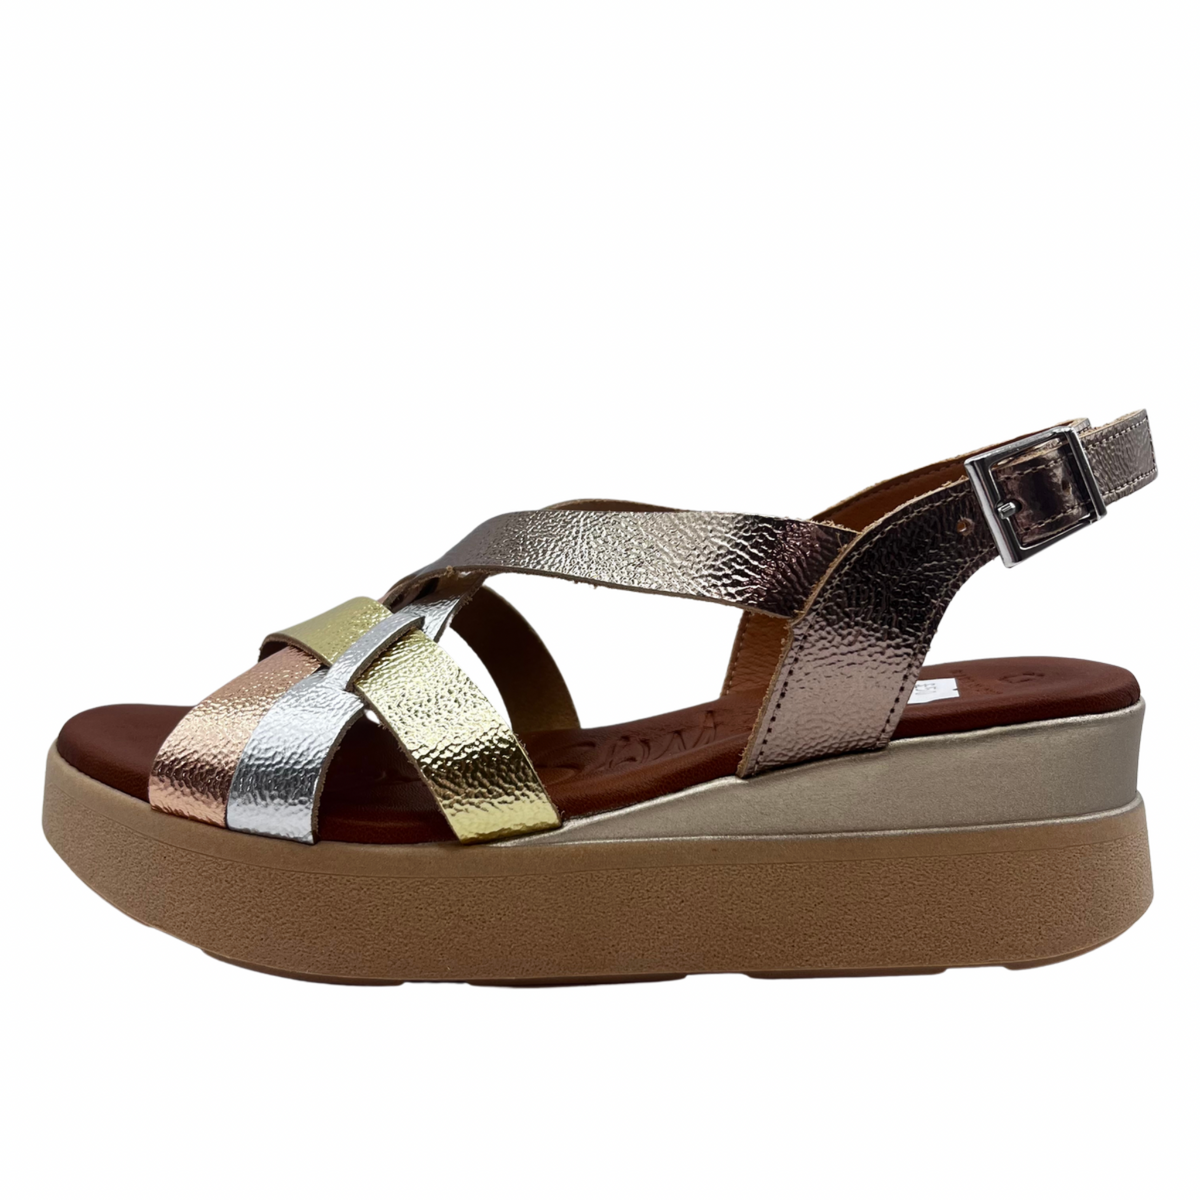 Oh My Sandals Metallic Mix Wedge Leather Sandal